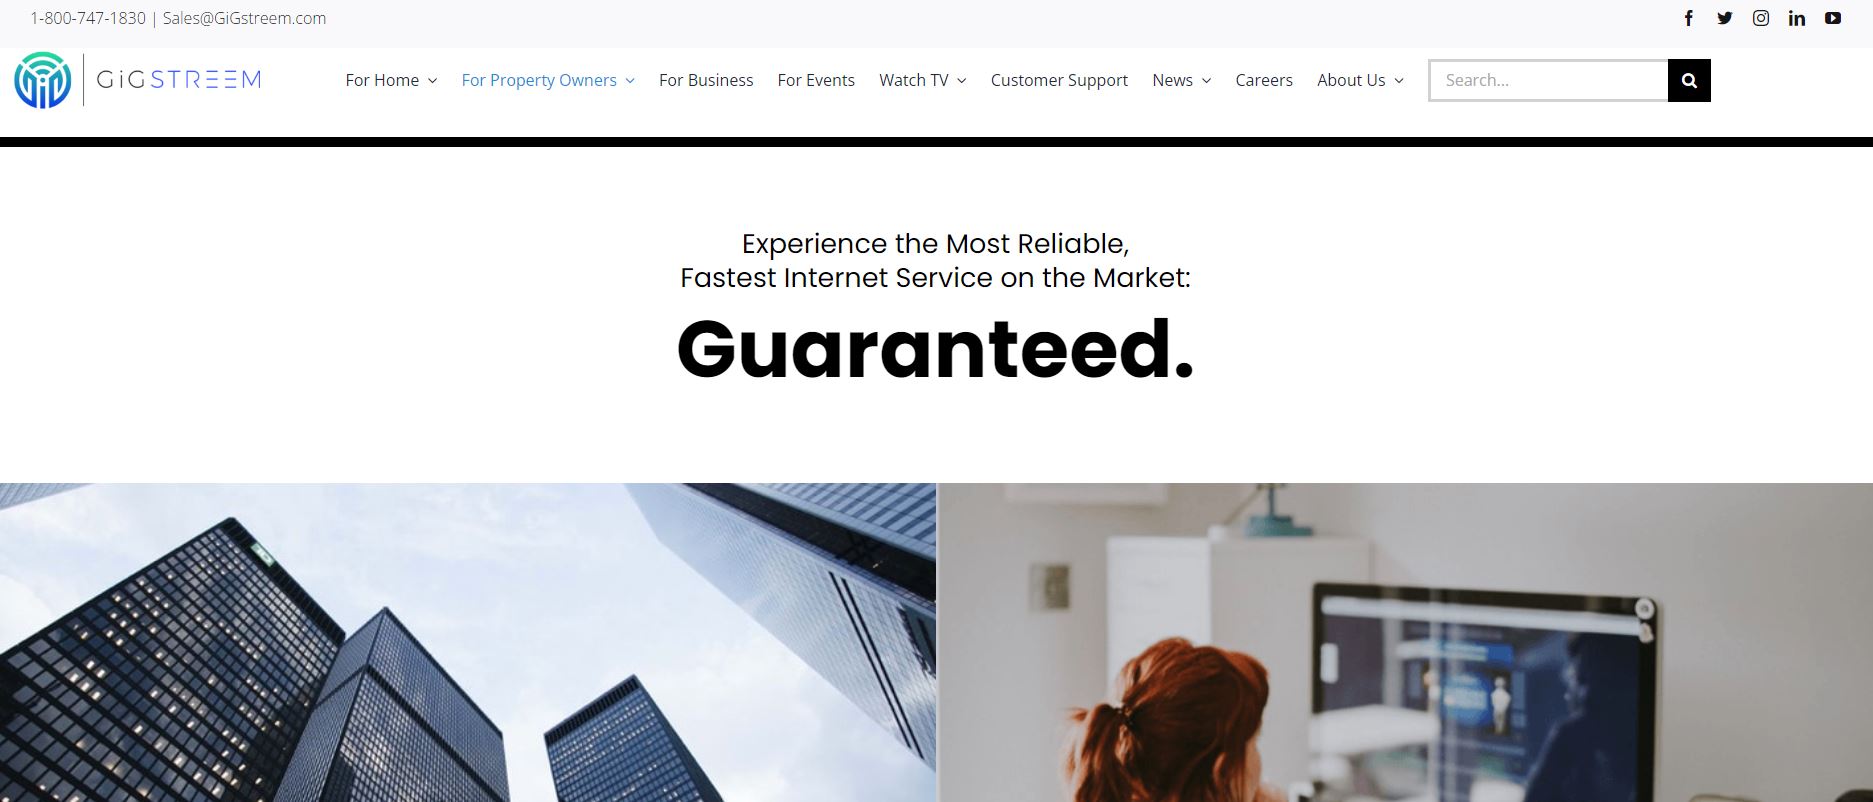 With $59 million in funding and a mission to revolutionize the telecommunications industry, GiGstreem offers the most reliable and fastest internet service on the market